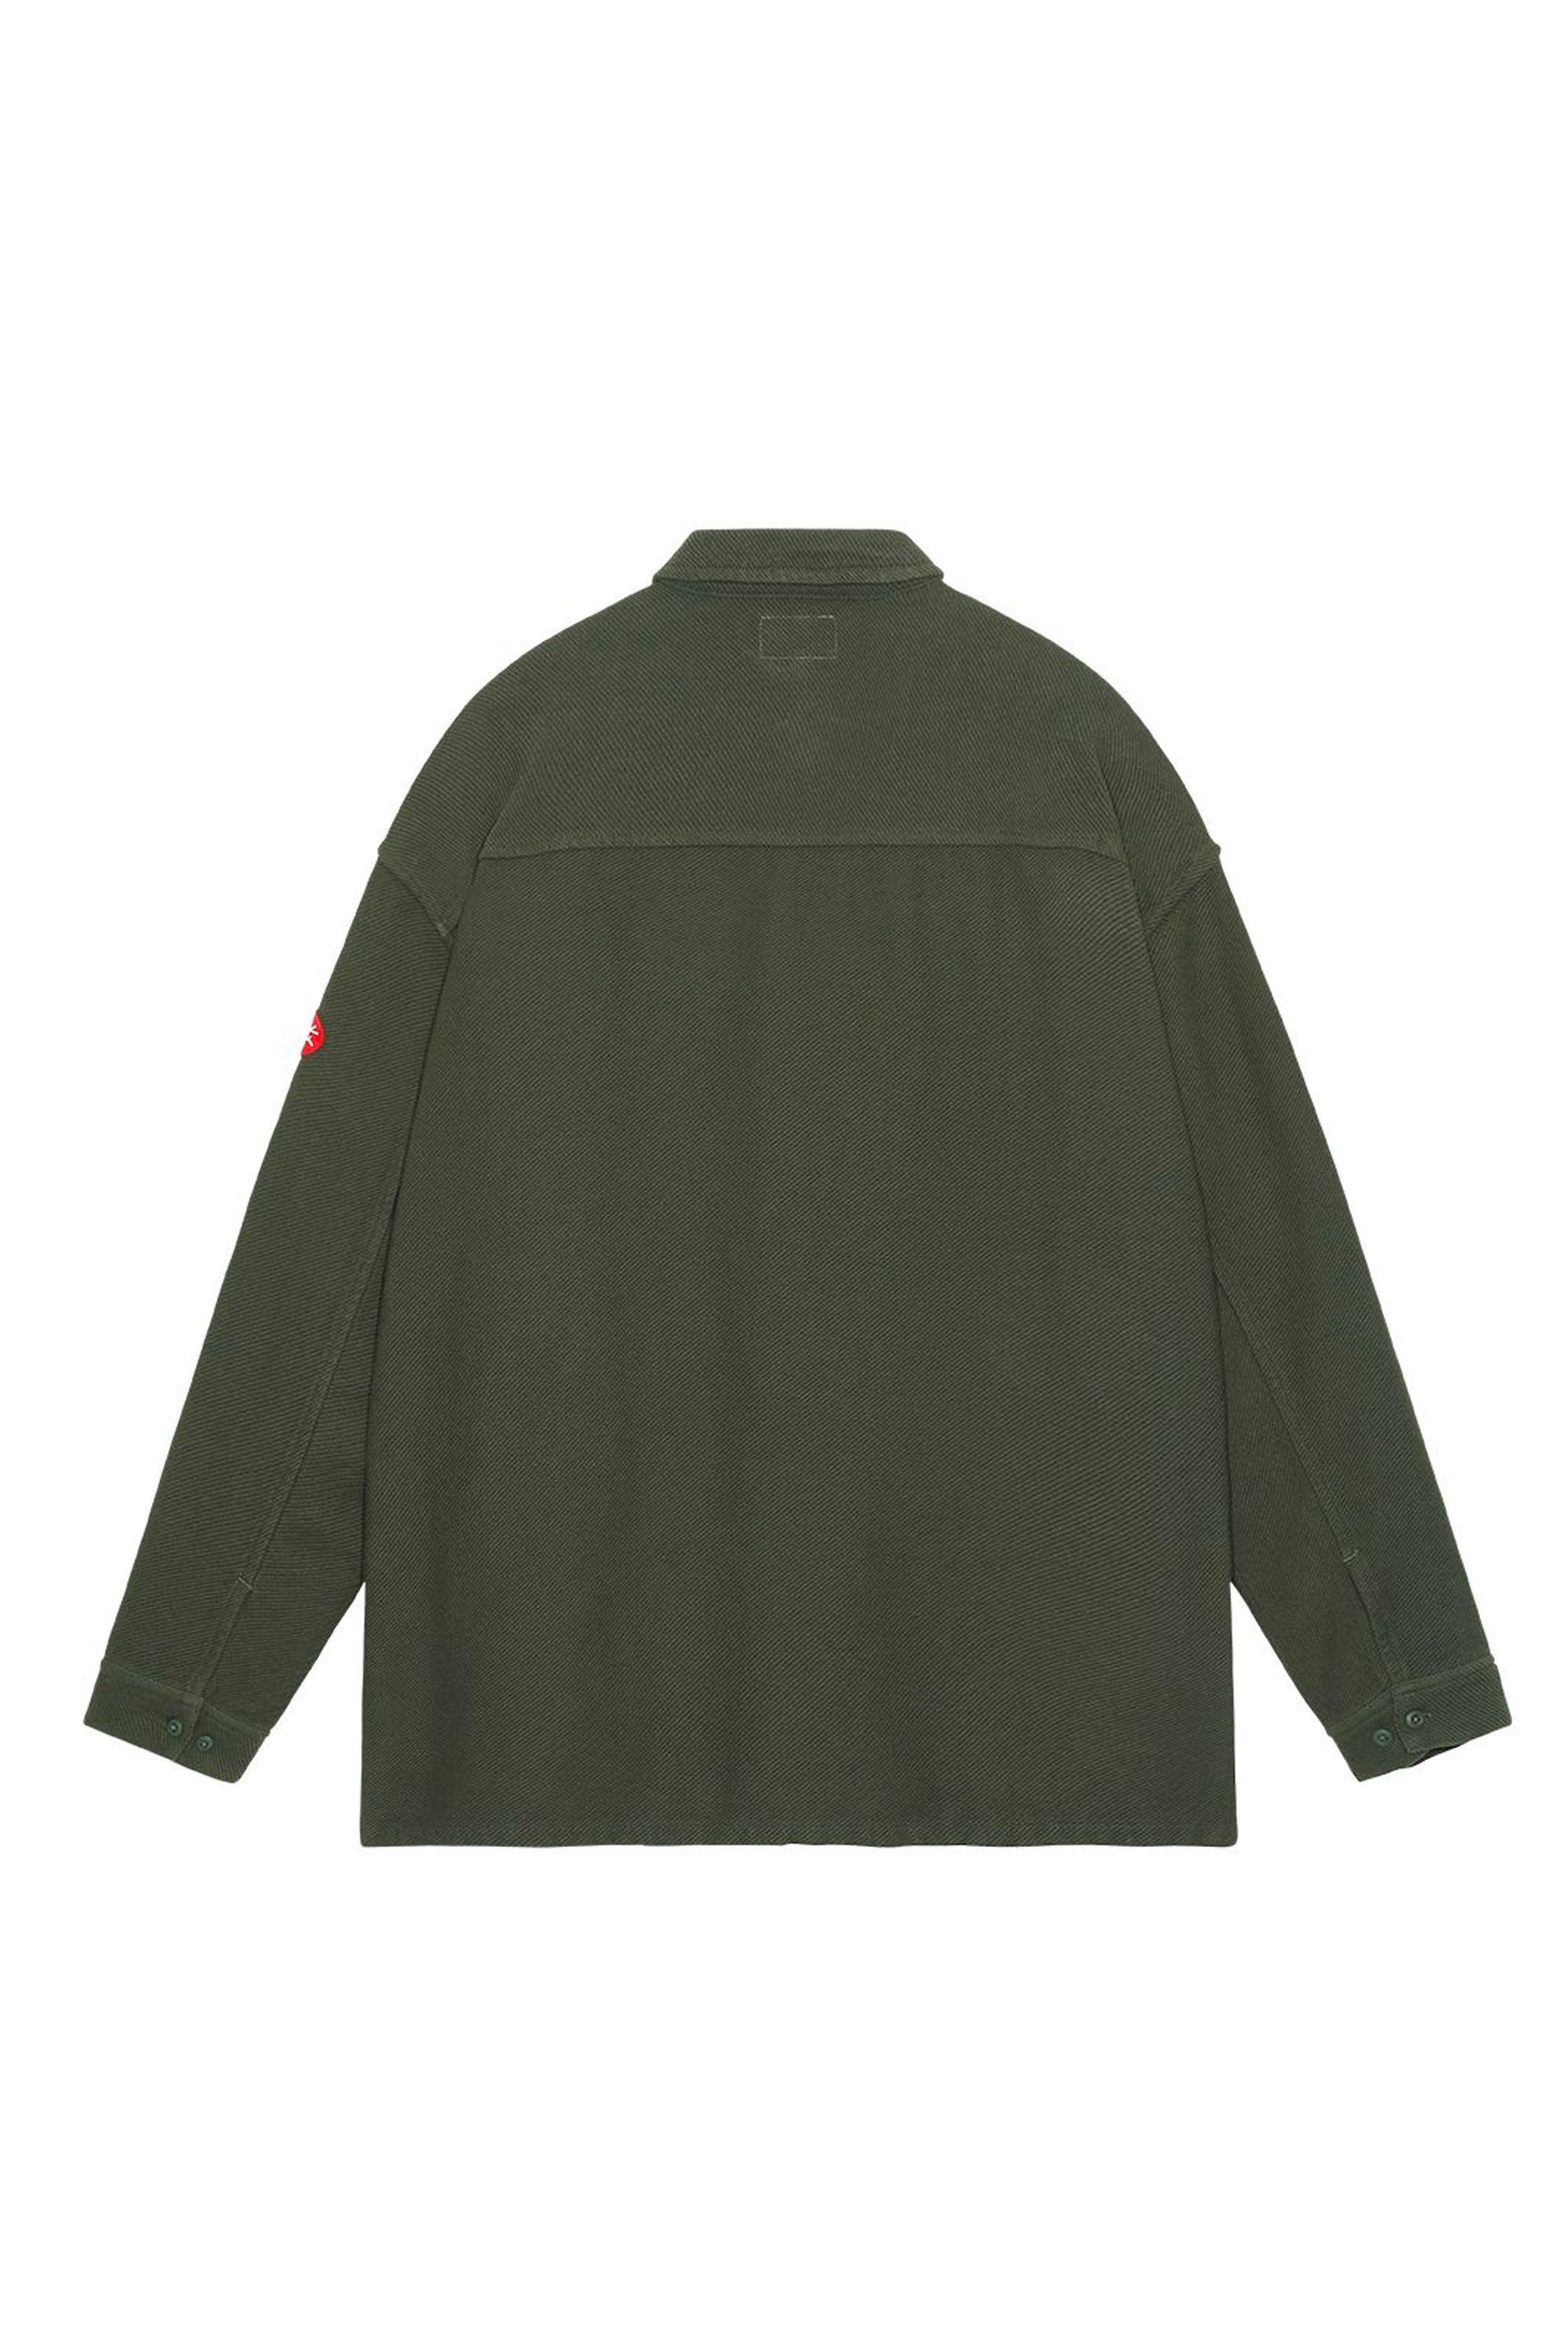 The CAV EMPT - WELT POCKETS BIG SHIRT  available online with global shipping, and in PAM Stores Melbourne and Sydney.